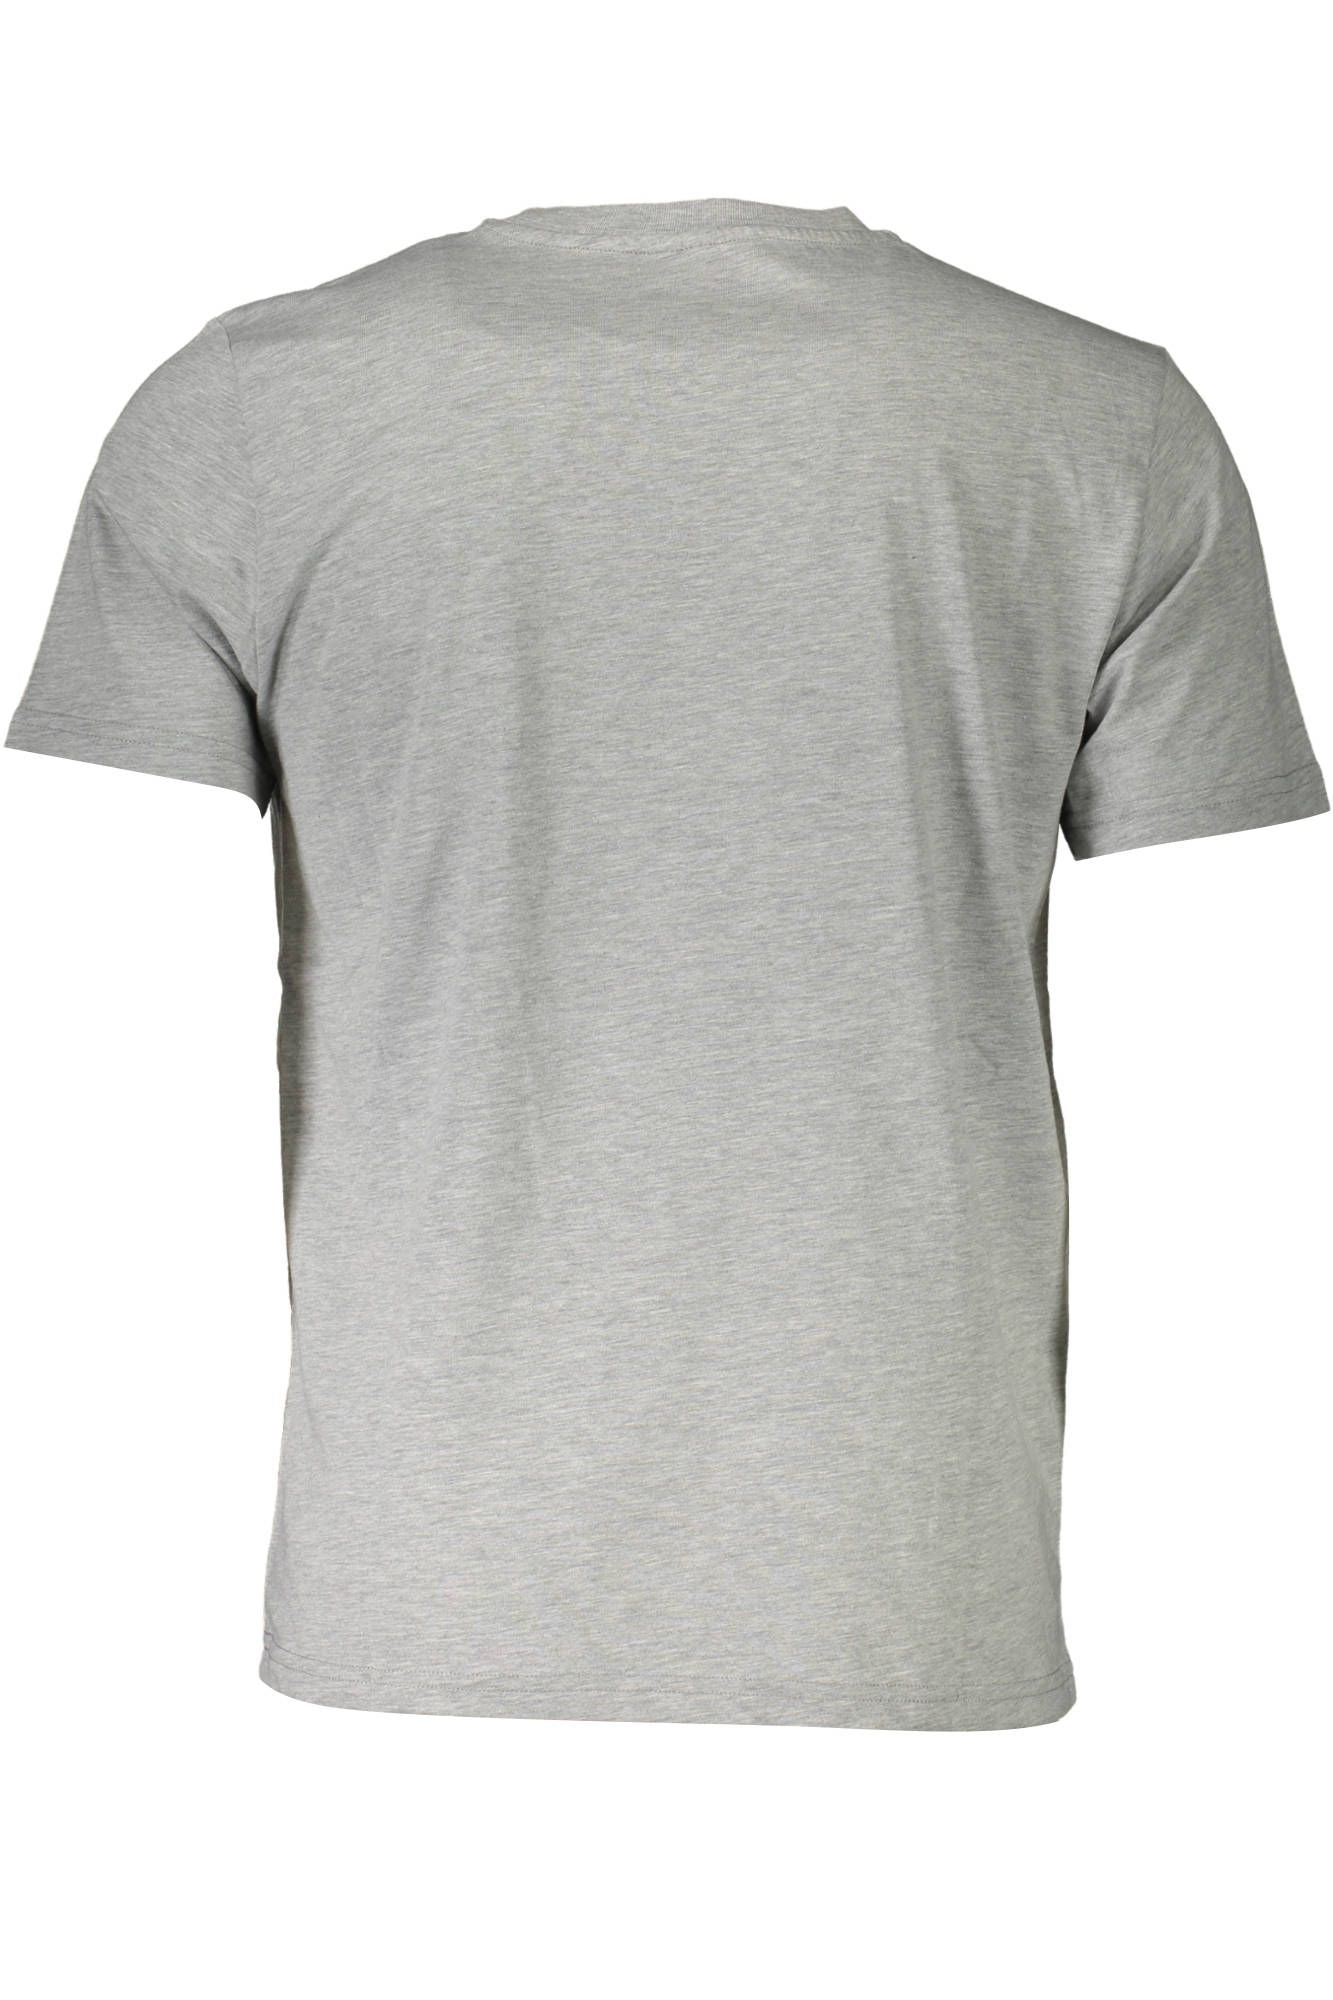 North Sails Sleek Gray Cotton T-Shirt with Iconic Print